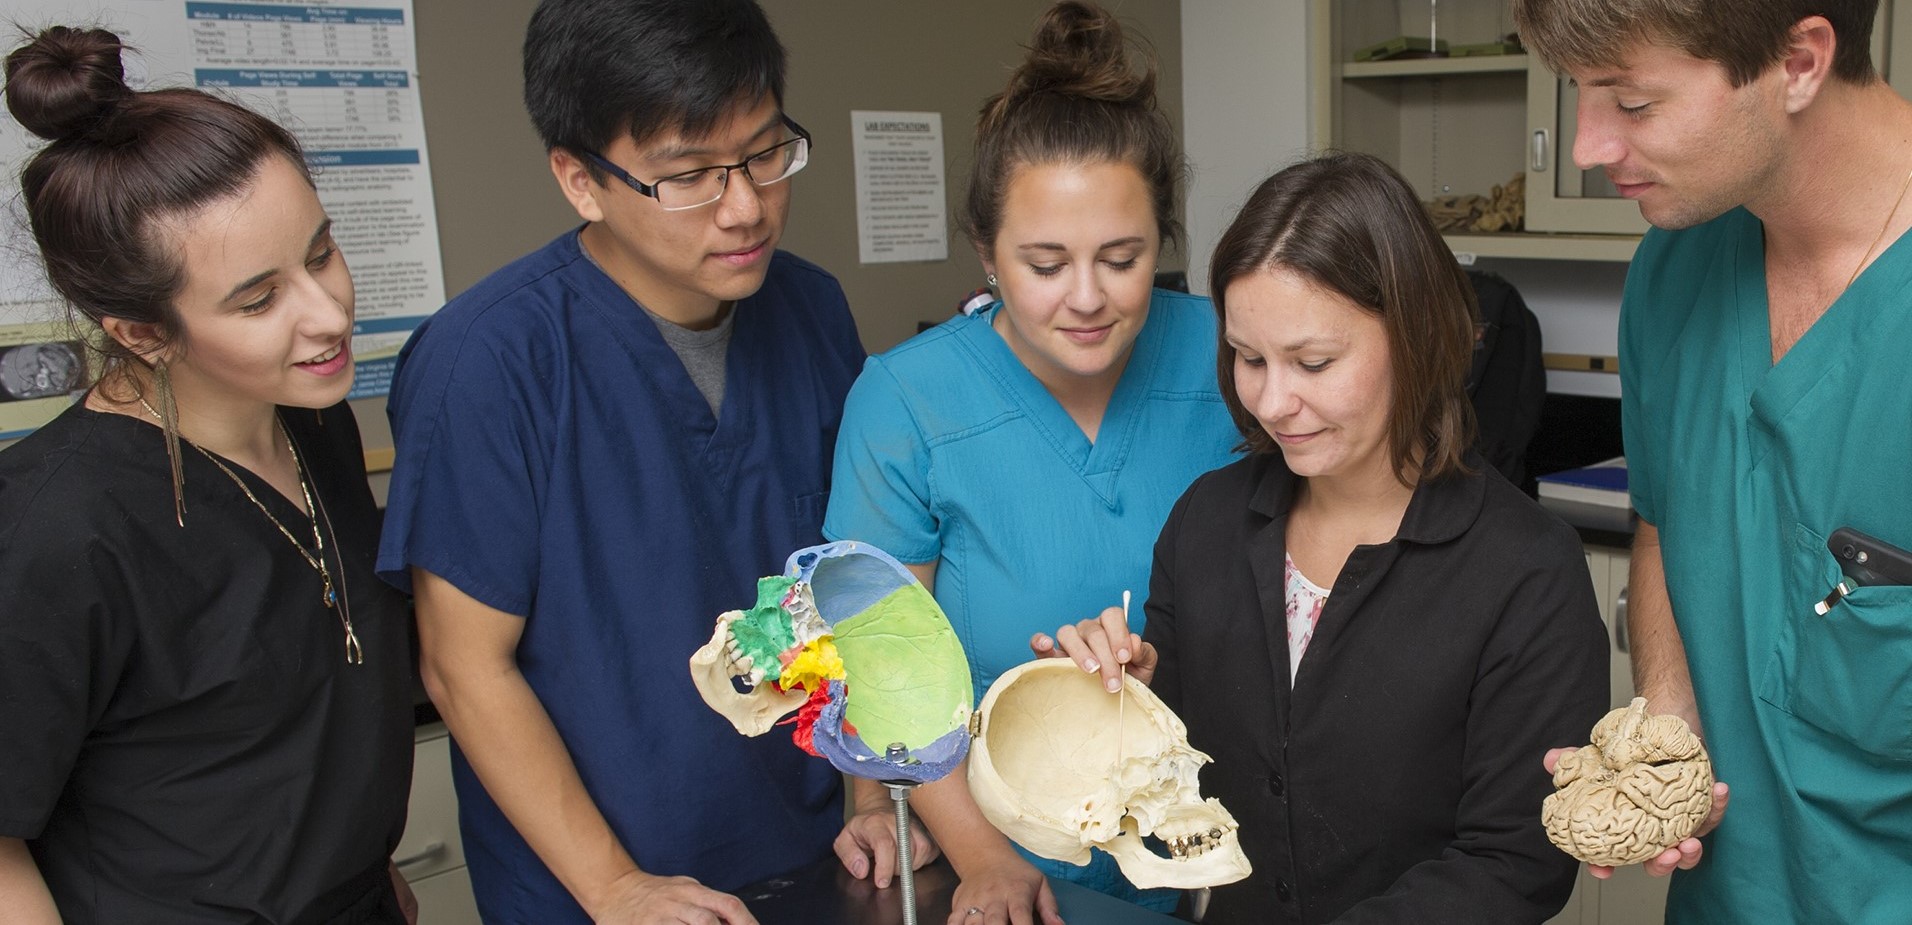 Instructor shows students model of a skull